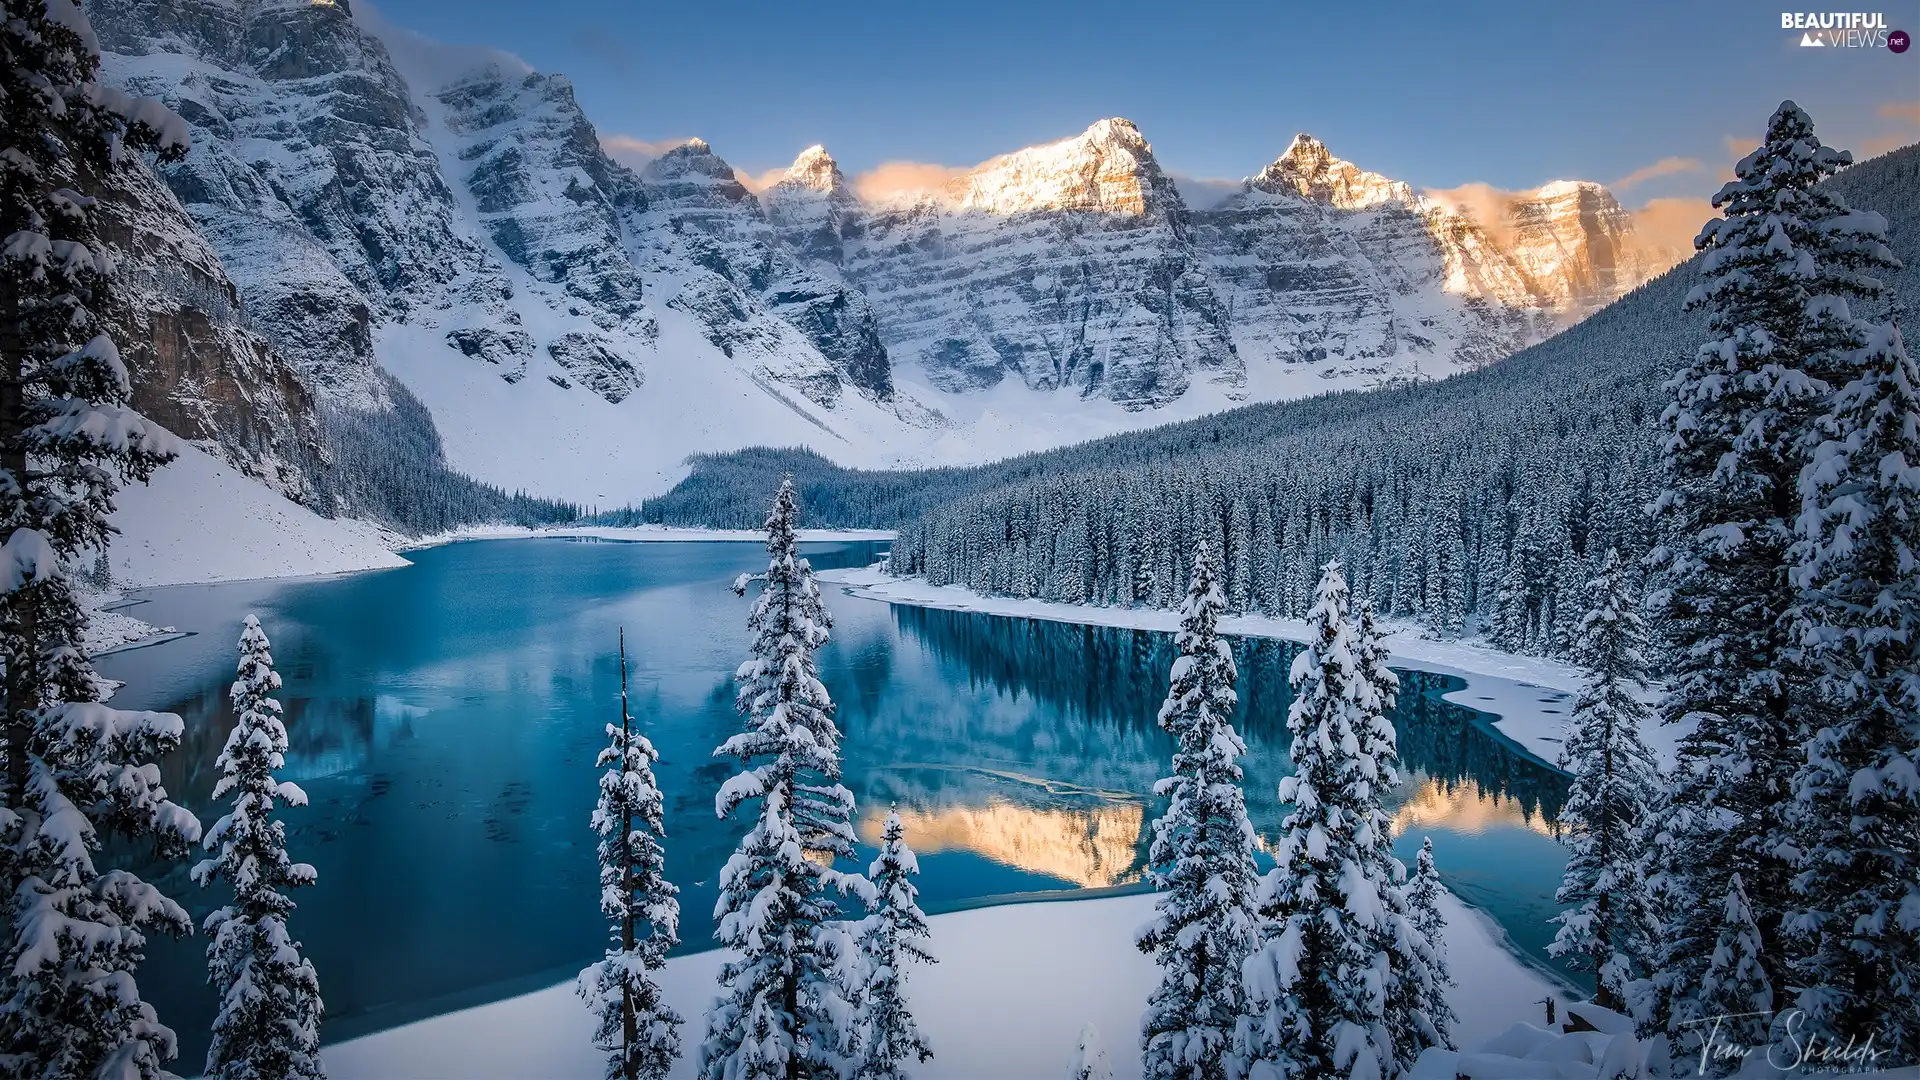 viewes, Mountains, Moraine Lake, Banff National Park, Snowy, winter, lake, Canada, Mountains, trees